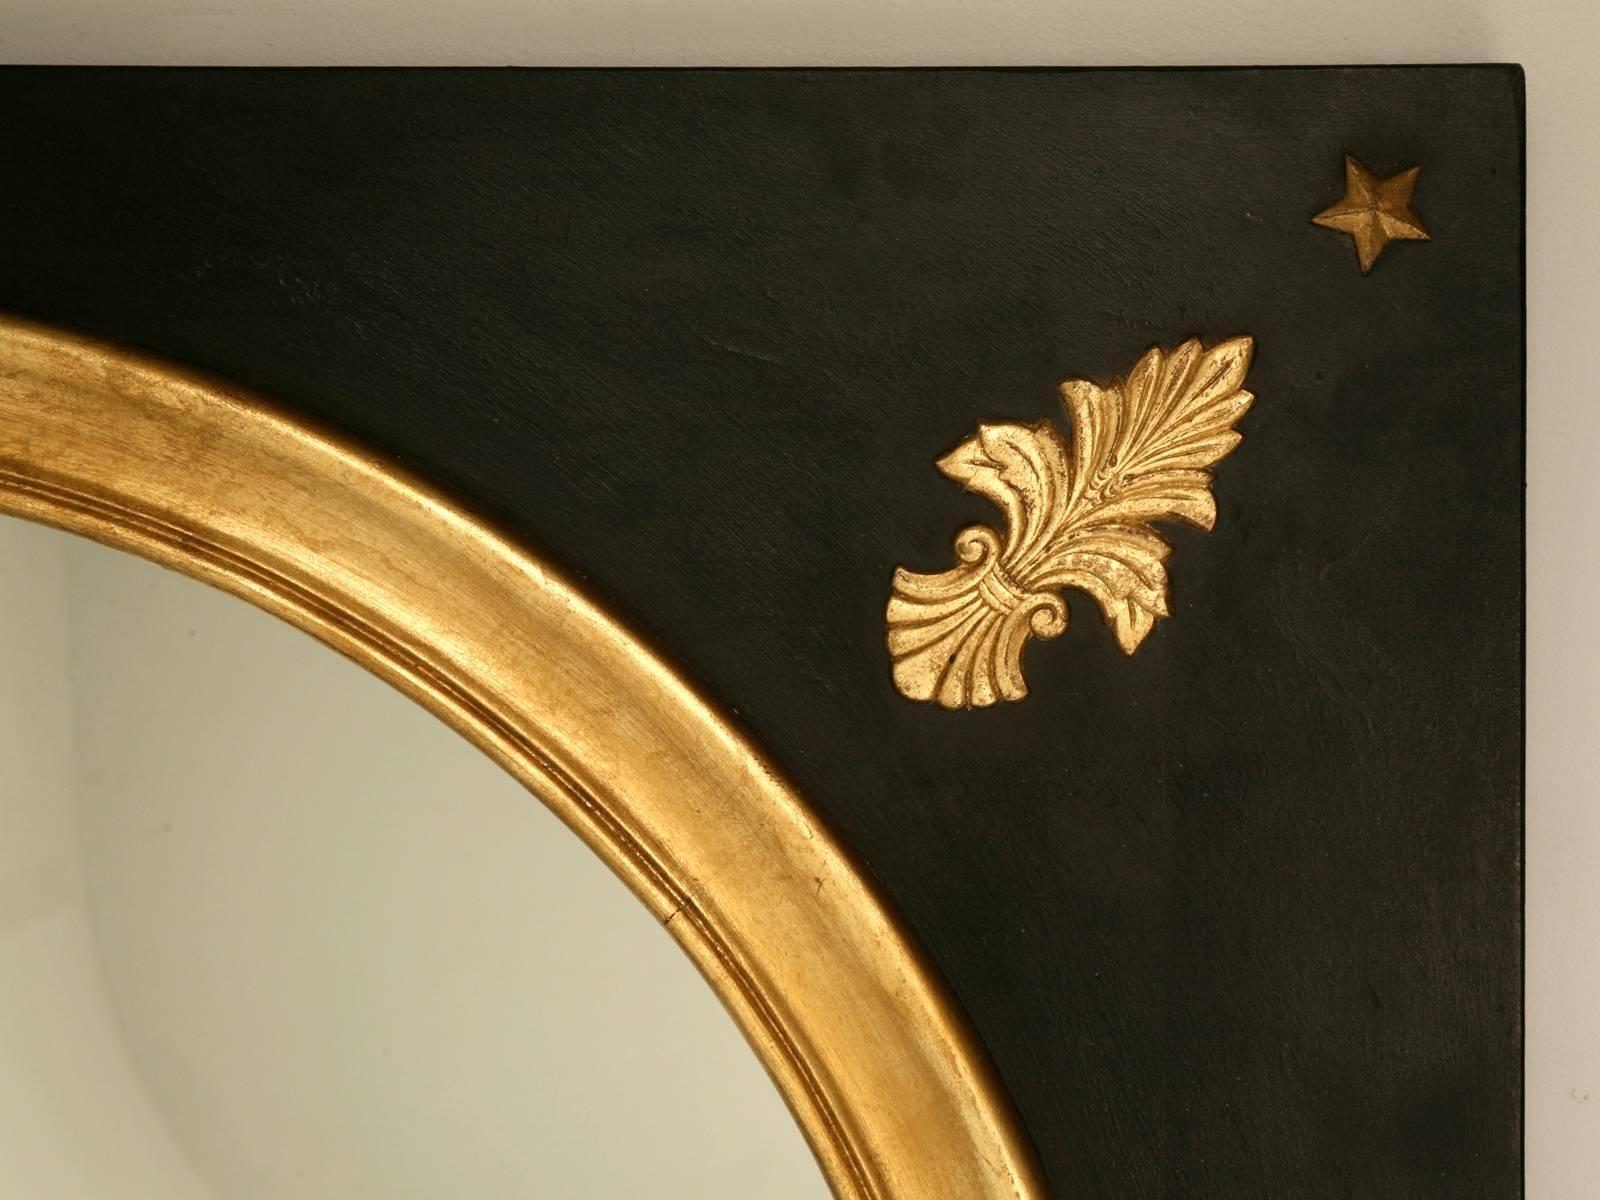 Custom mirror, handmade in our workshop, from solid wood in a beautiful black painted frame, complimented with carved gilded highlights.